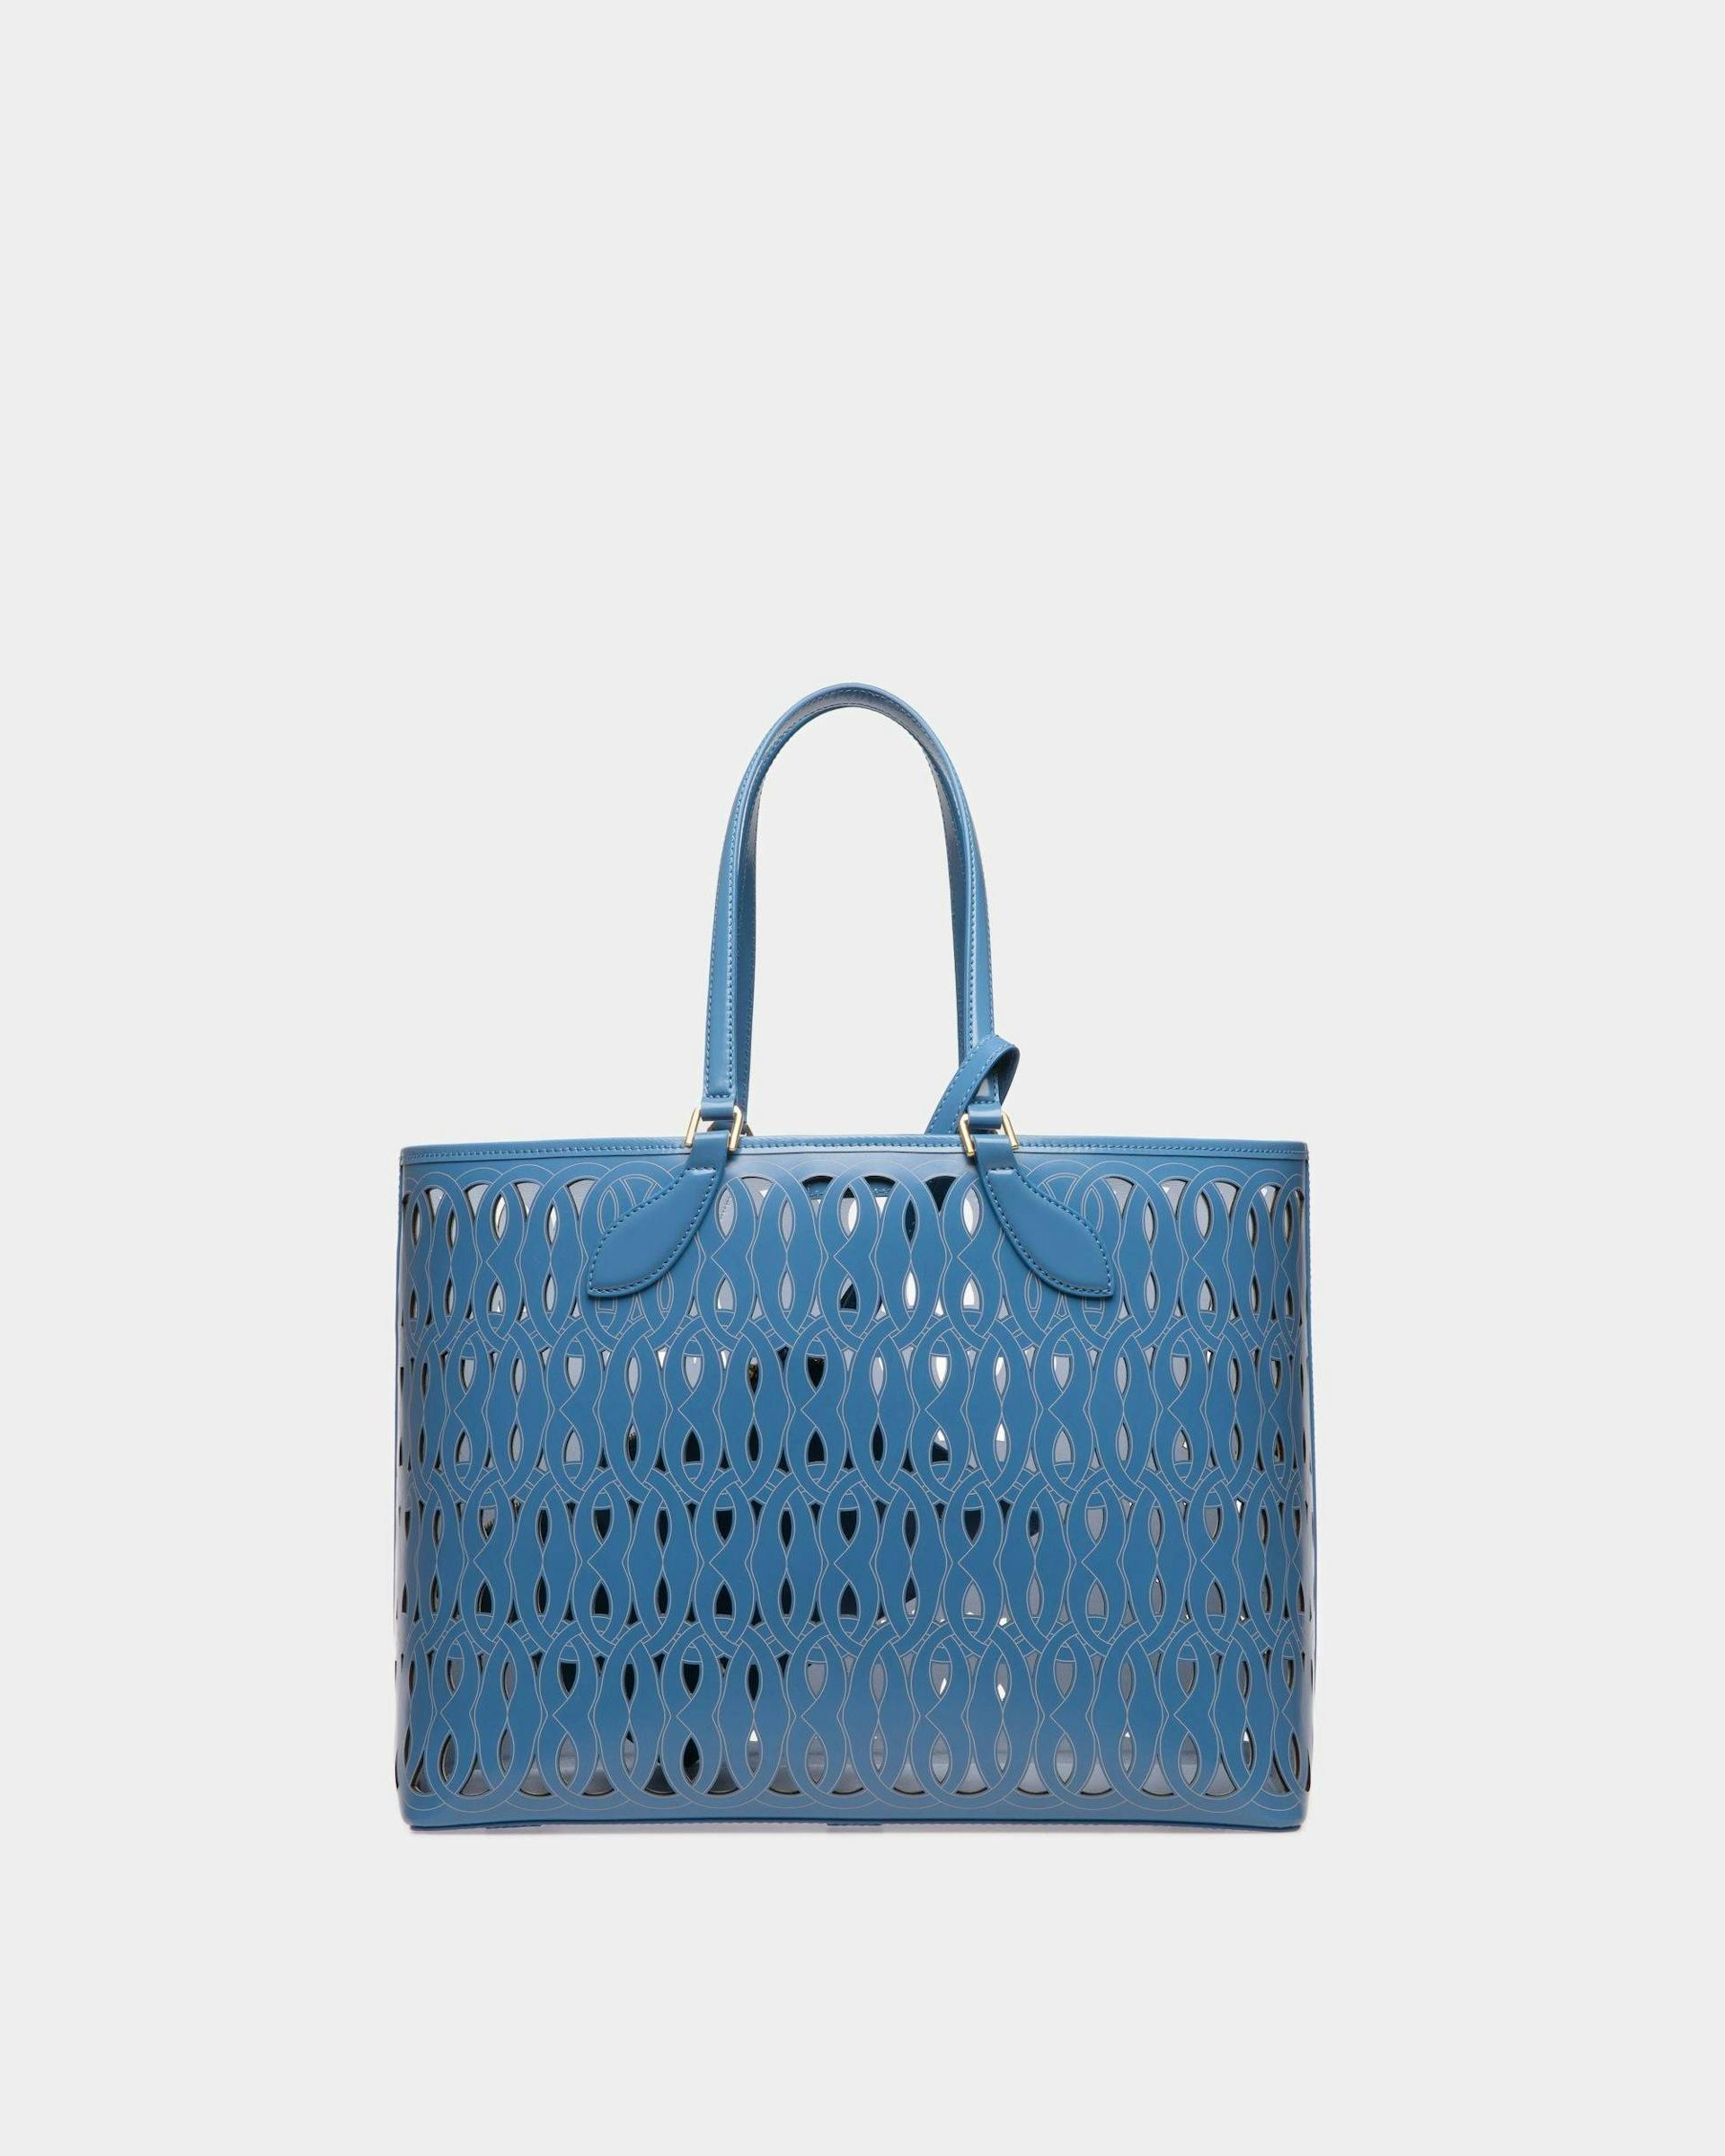 Women's Lago Tote Bag In Blue Leather | Bally | Still Life Back